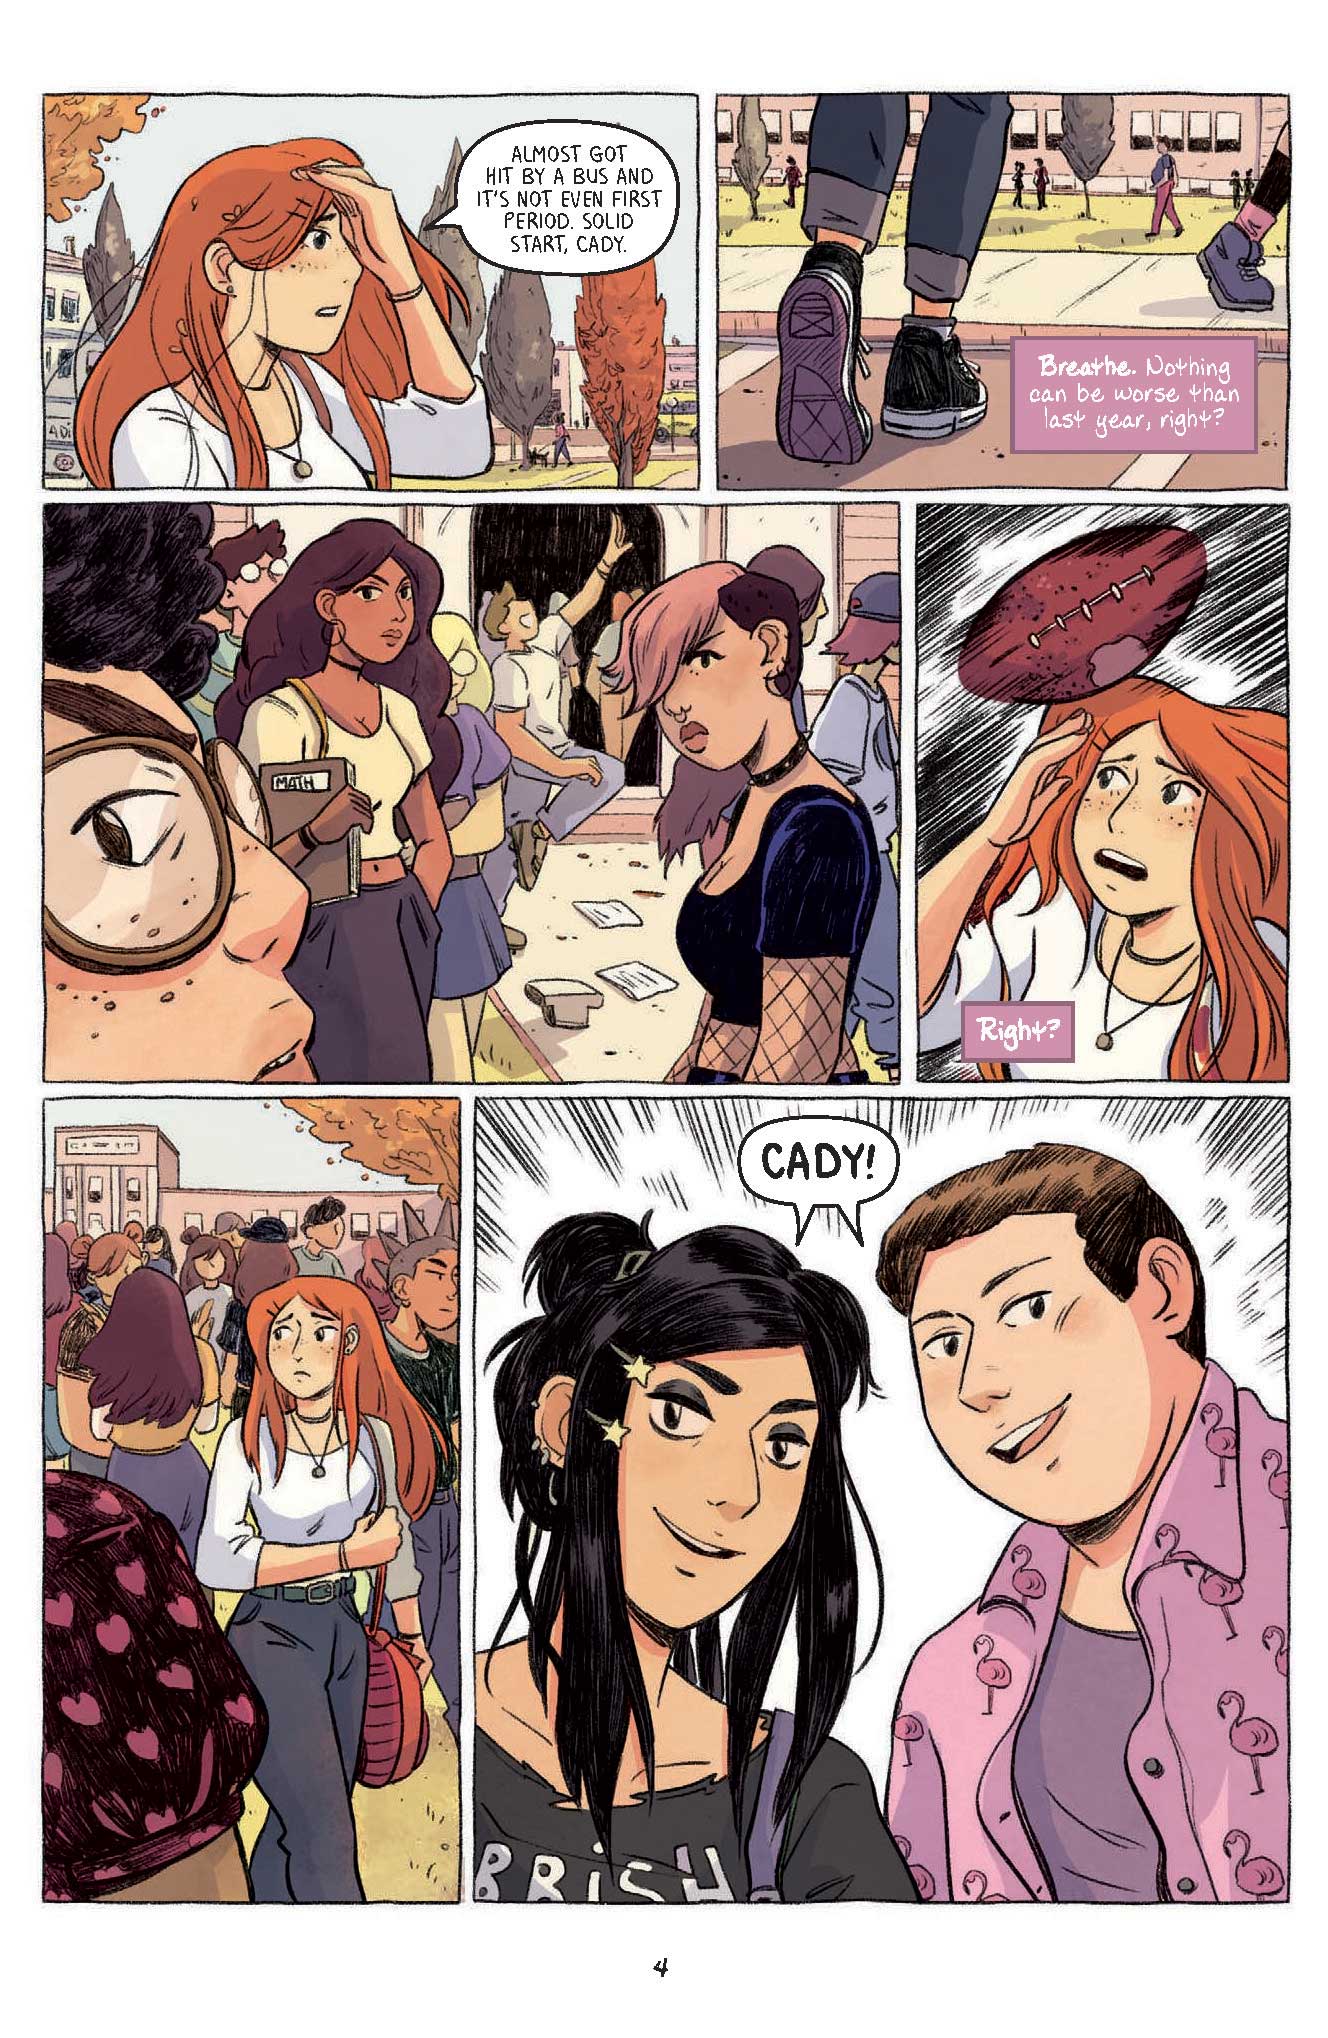 Mean Girls gets a comic book sequel from Insight Comics — Major Spoilers — Comic ...1328 x 2038